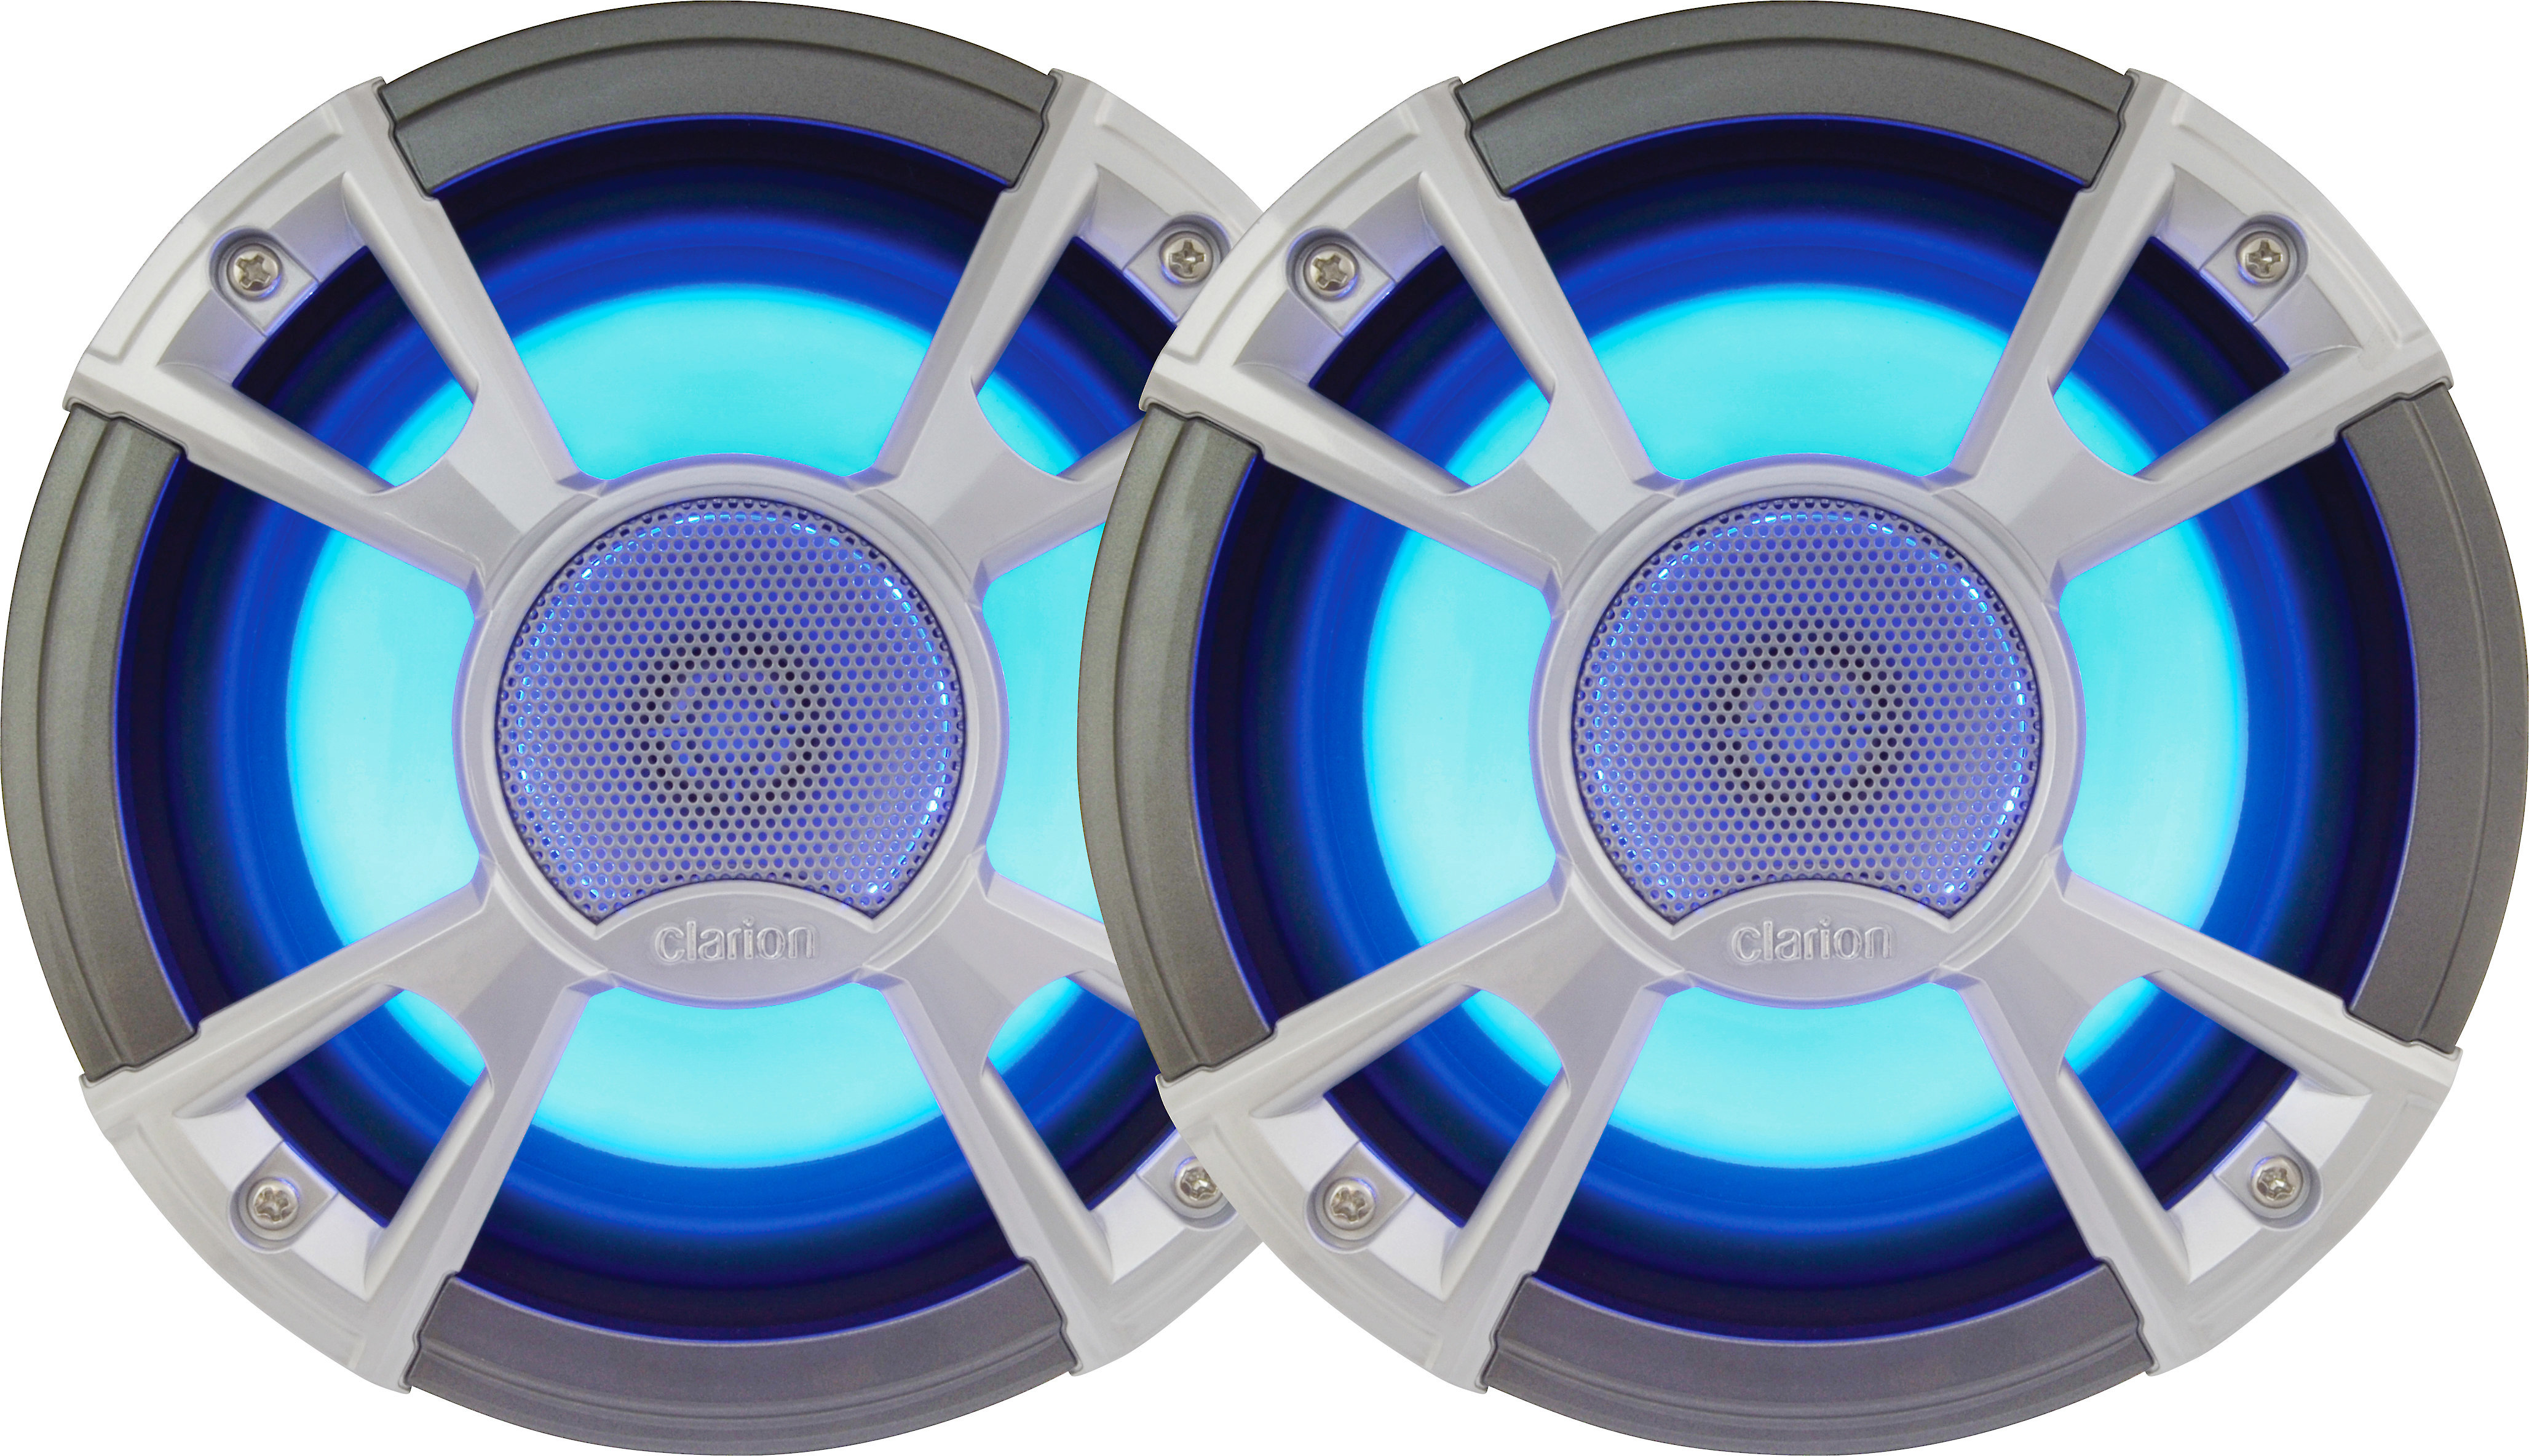 speakers with lights built in